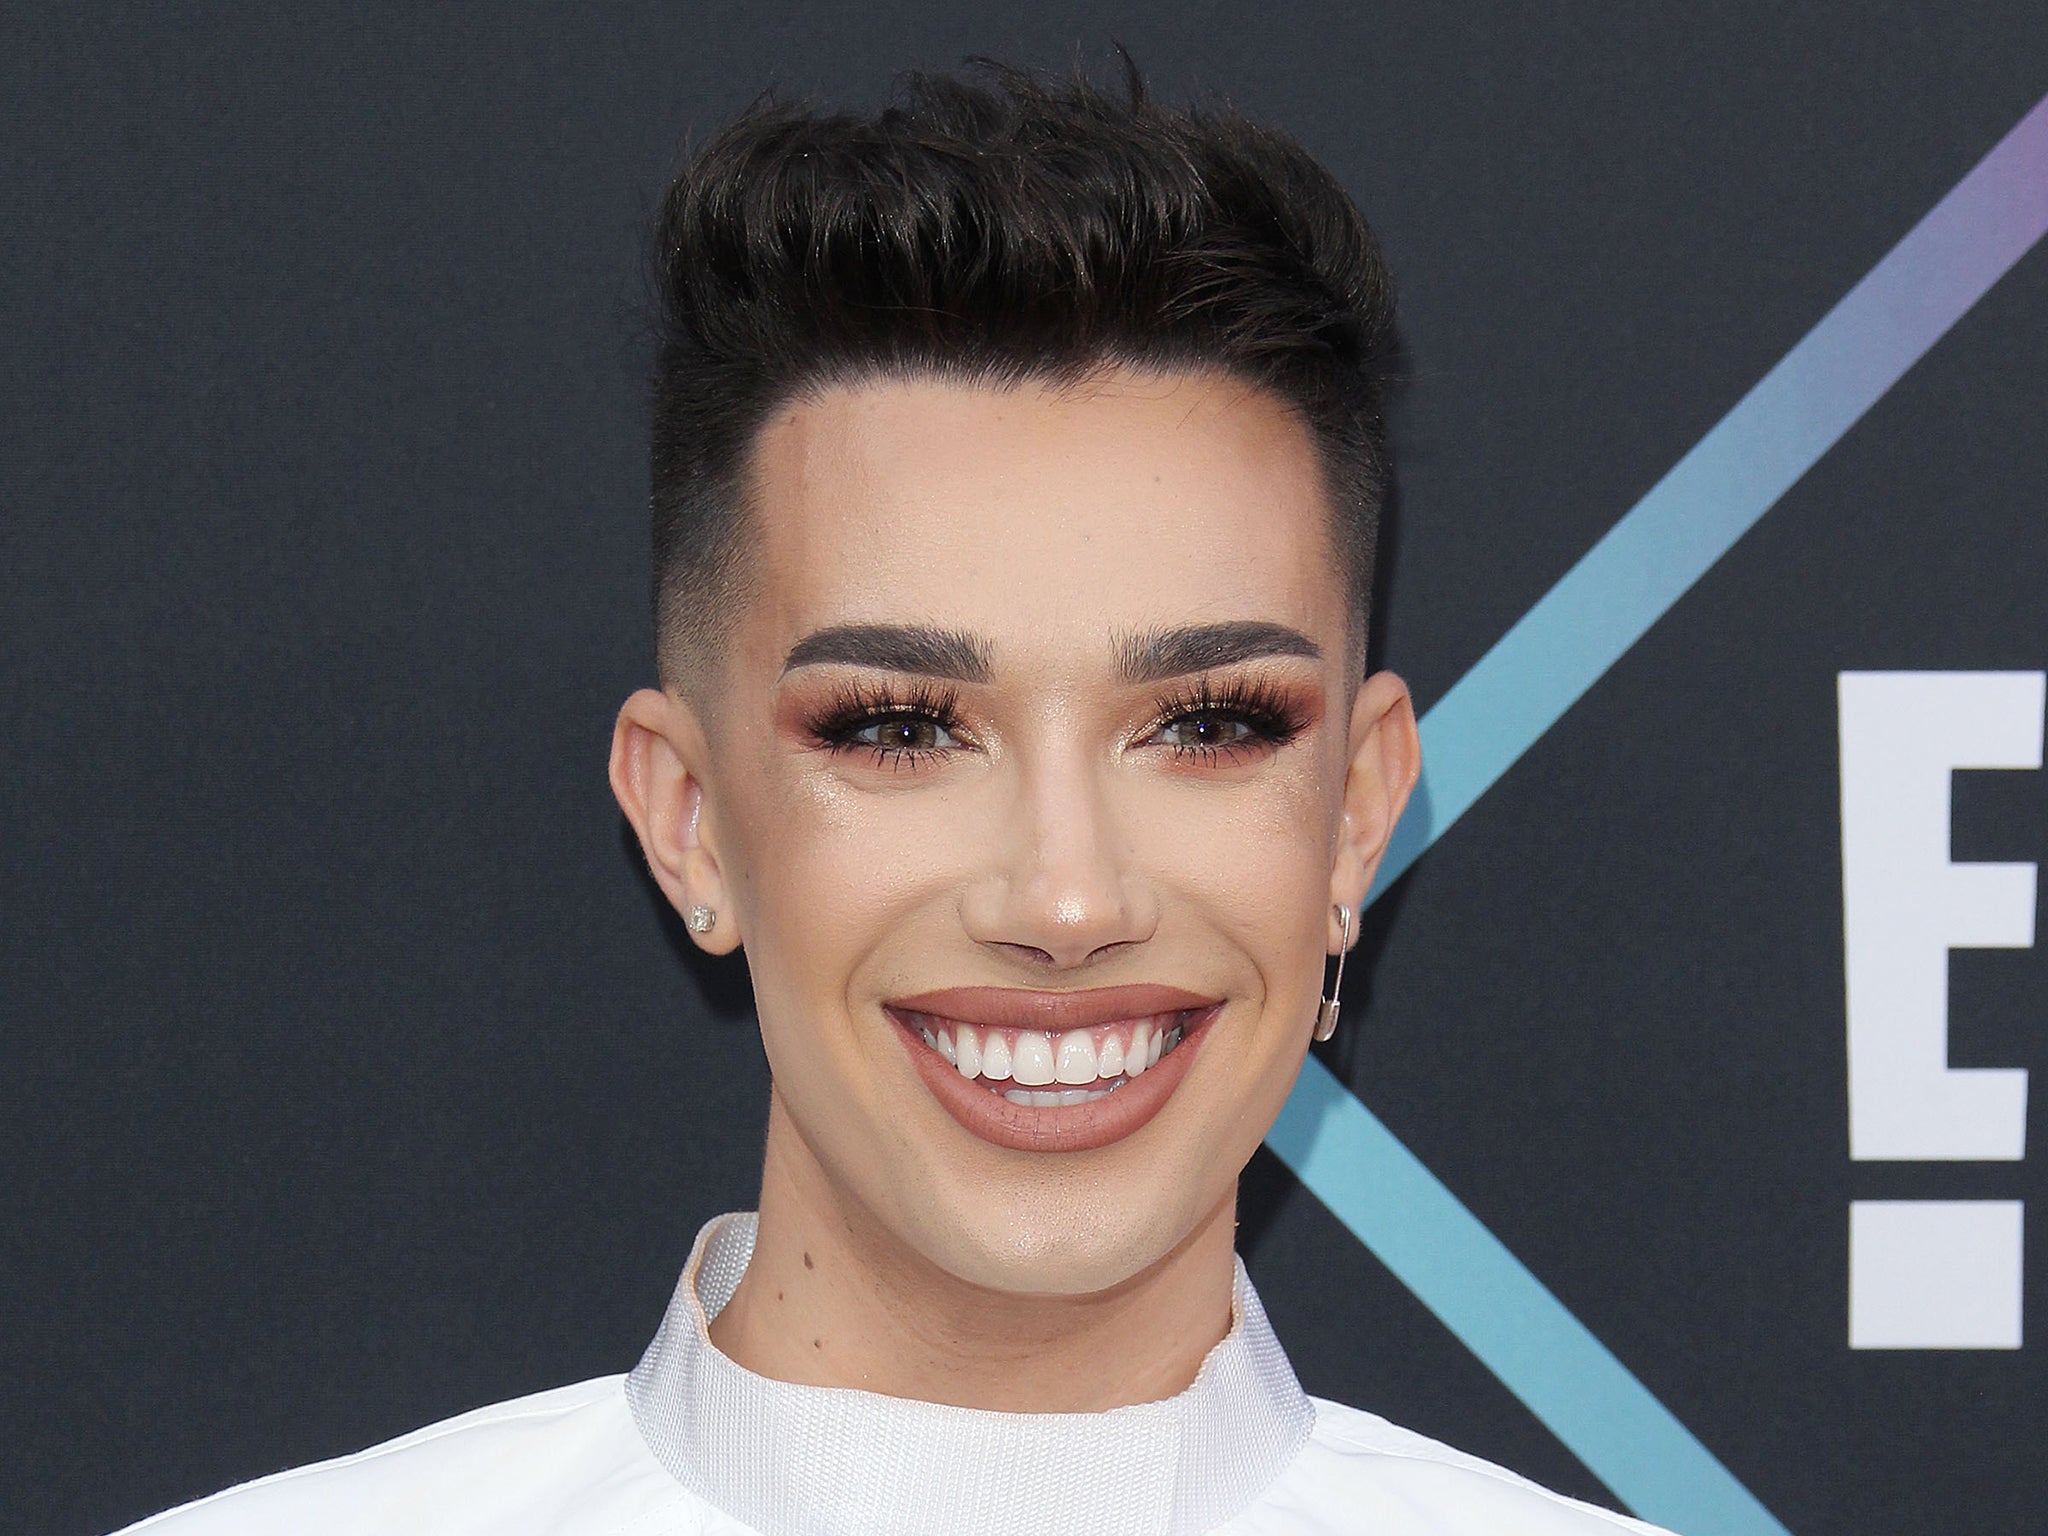 Youtuber James Charles Loses More Than One Million Subscribe